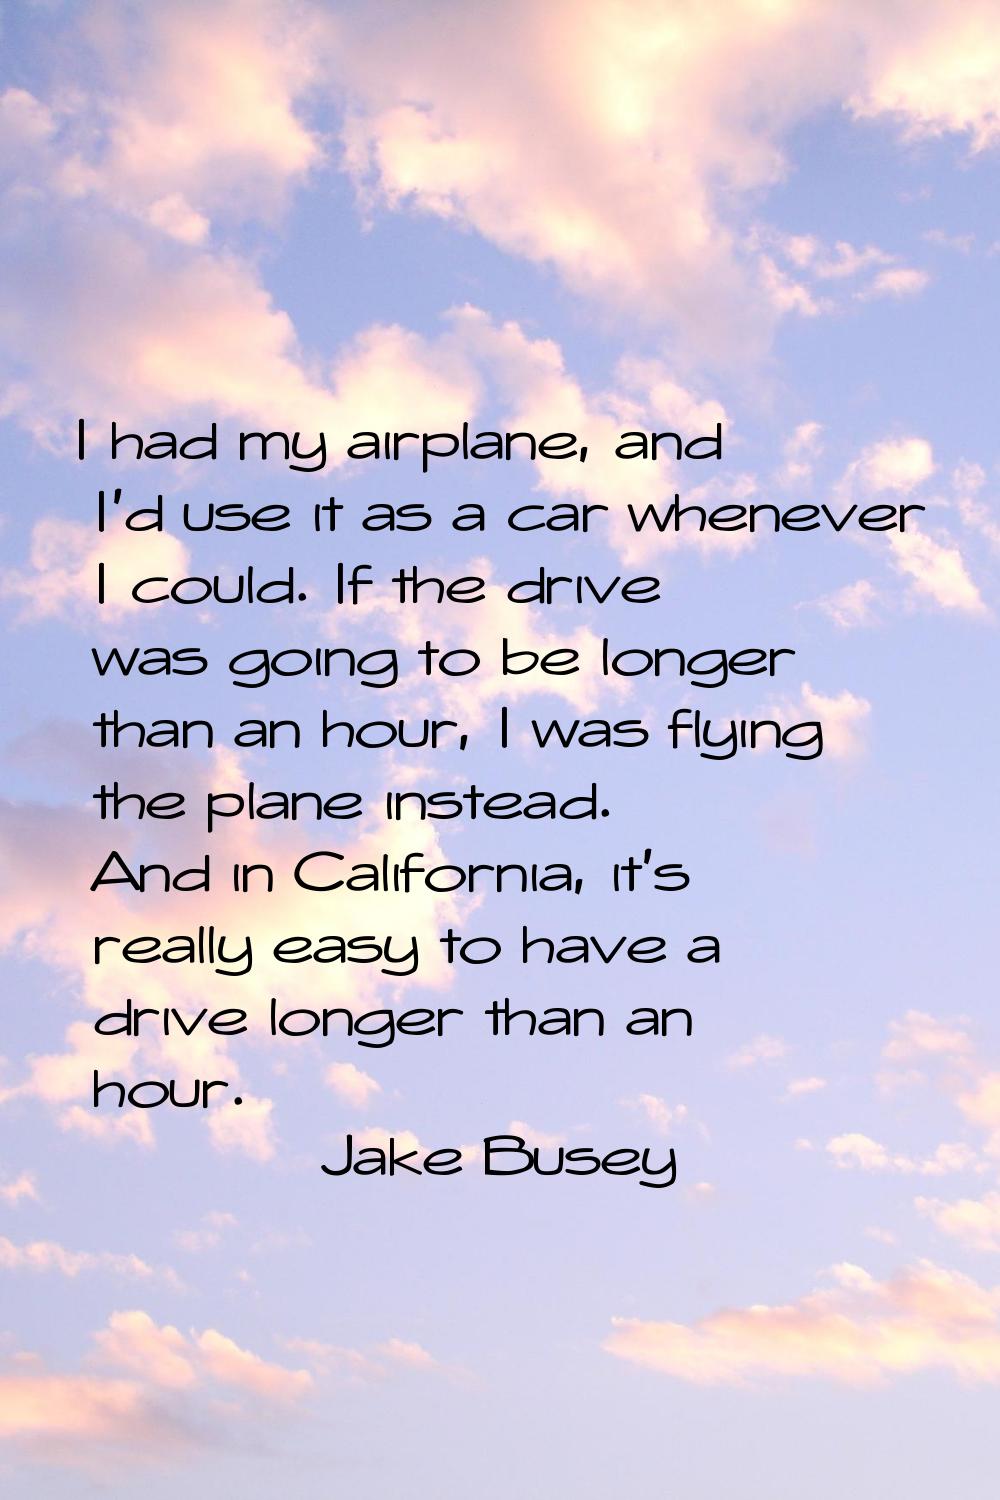 I had my airplane, and I'd use it as a car whenever I could. If the drive was going to be longer th